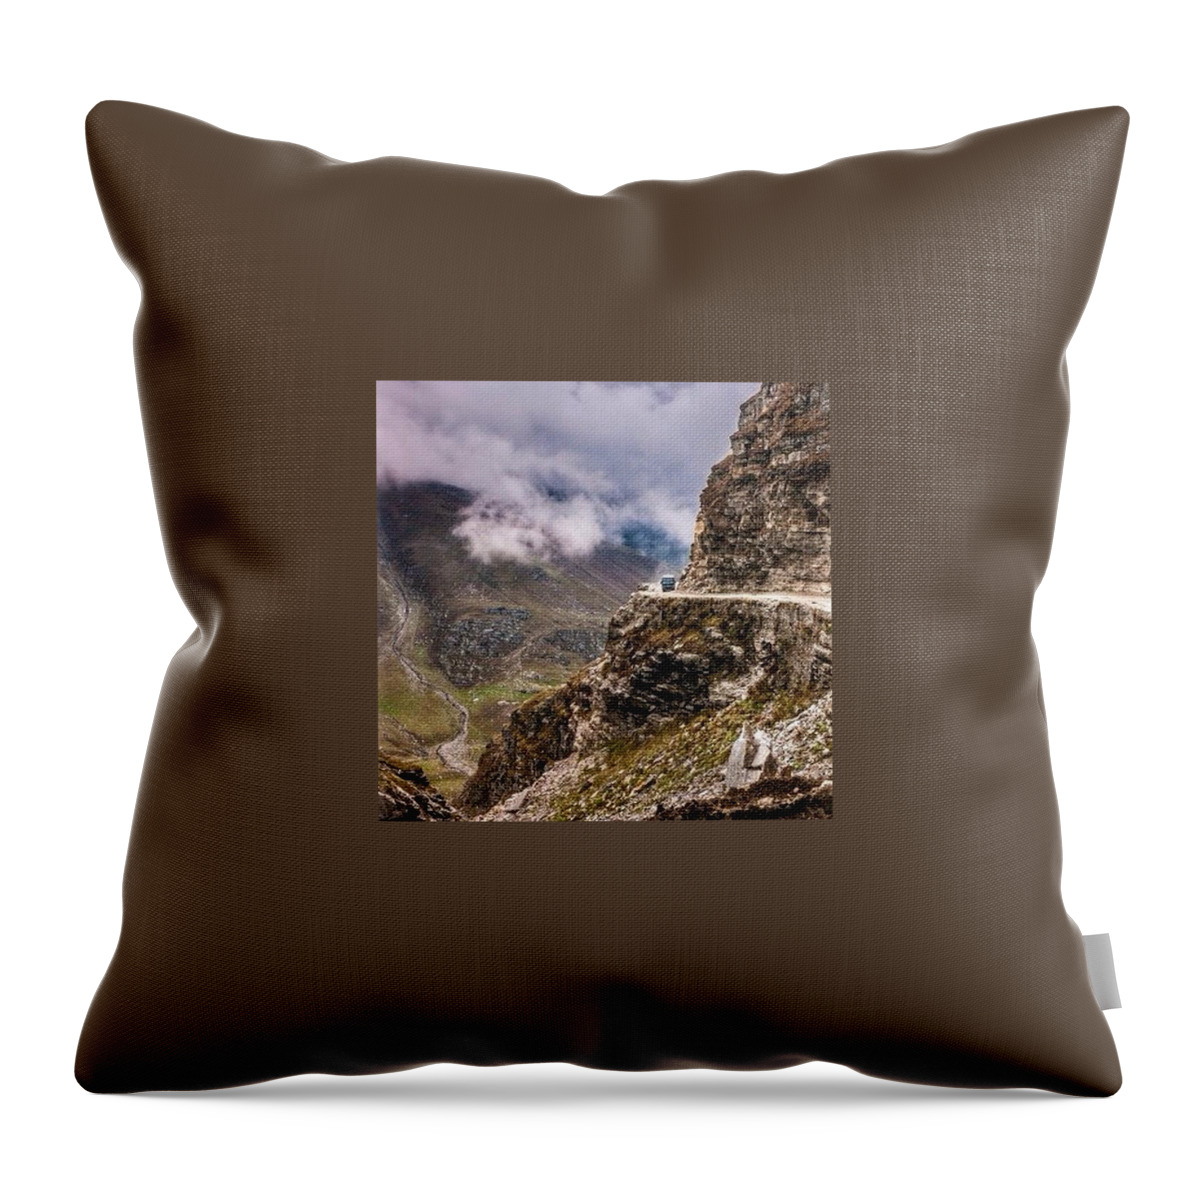 Mountains Throw Pillow featuring the photograph Our Bus Journey Through The Himalayas by Aleck Cartwright